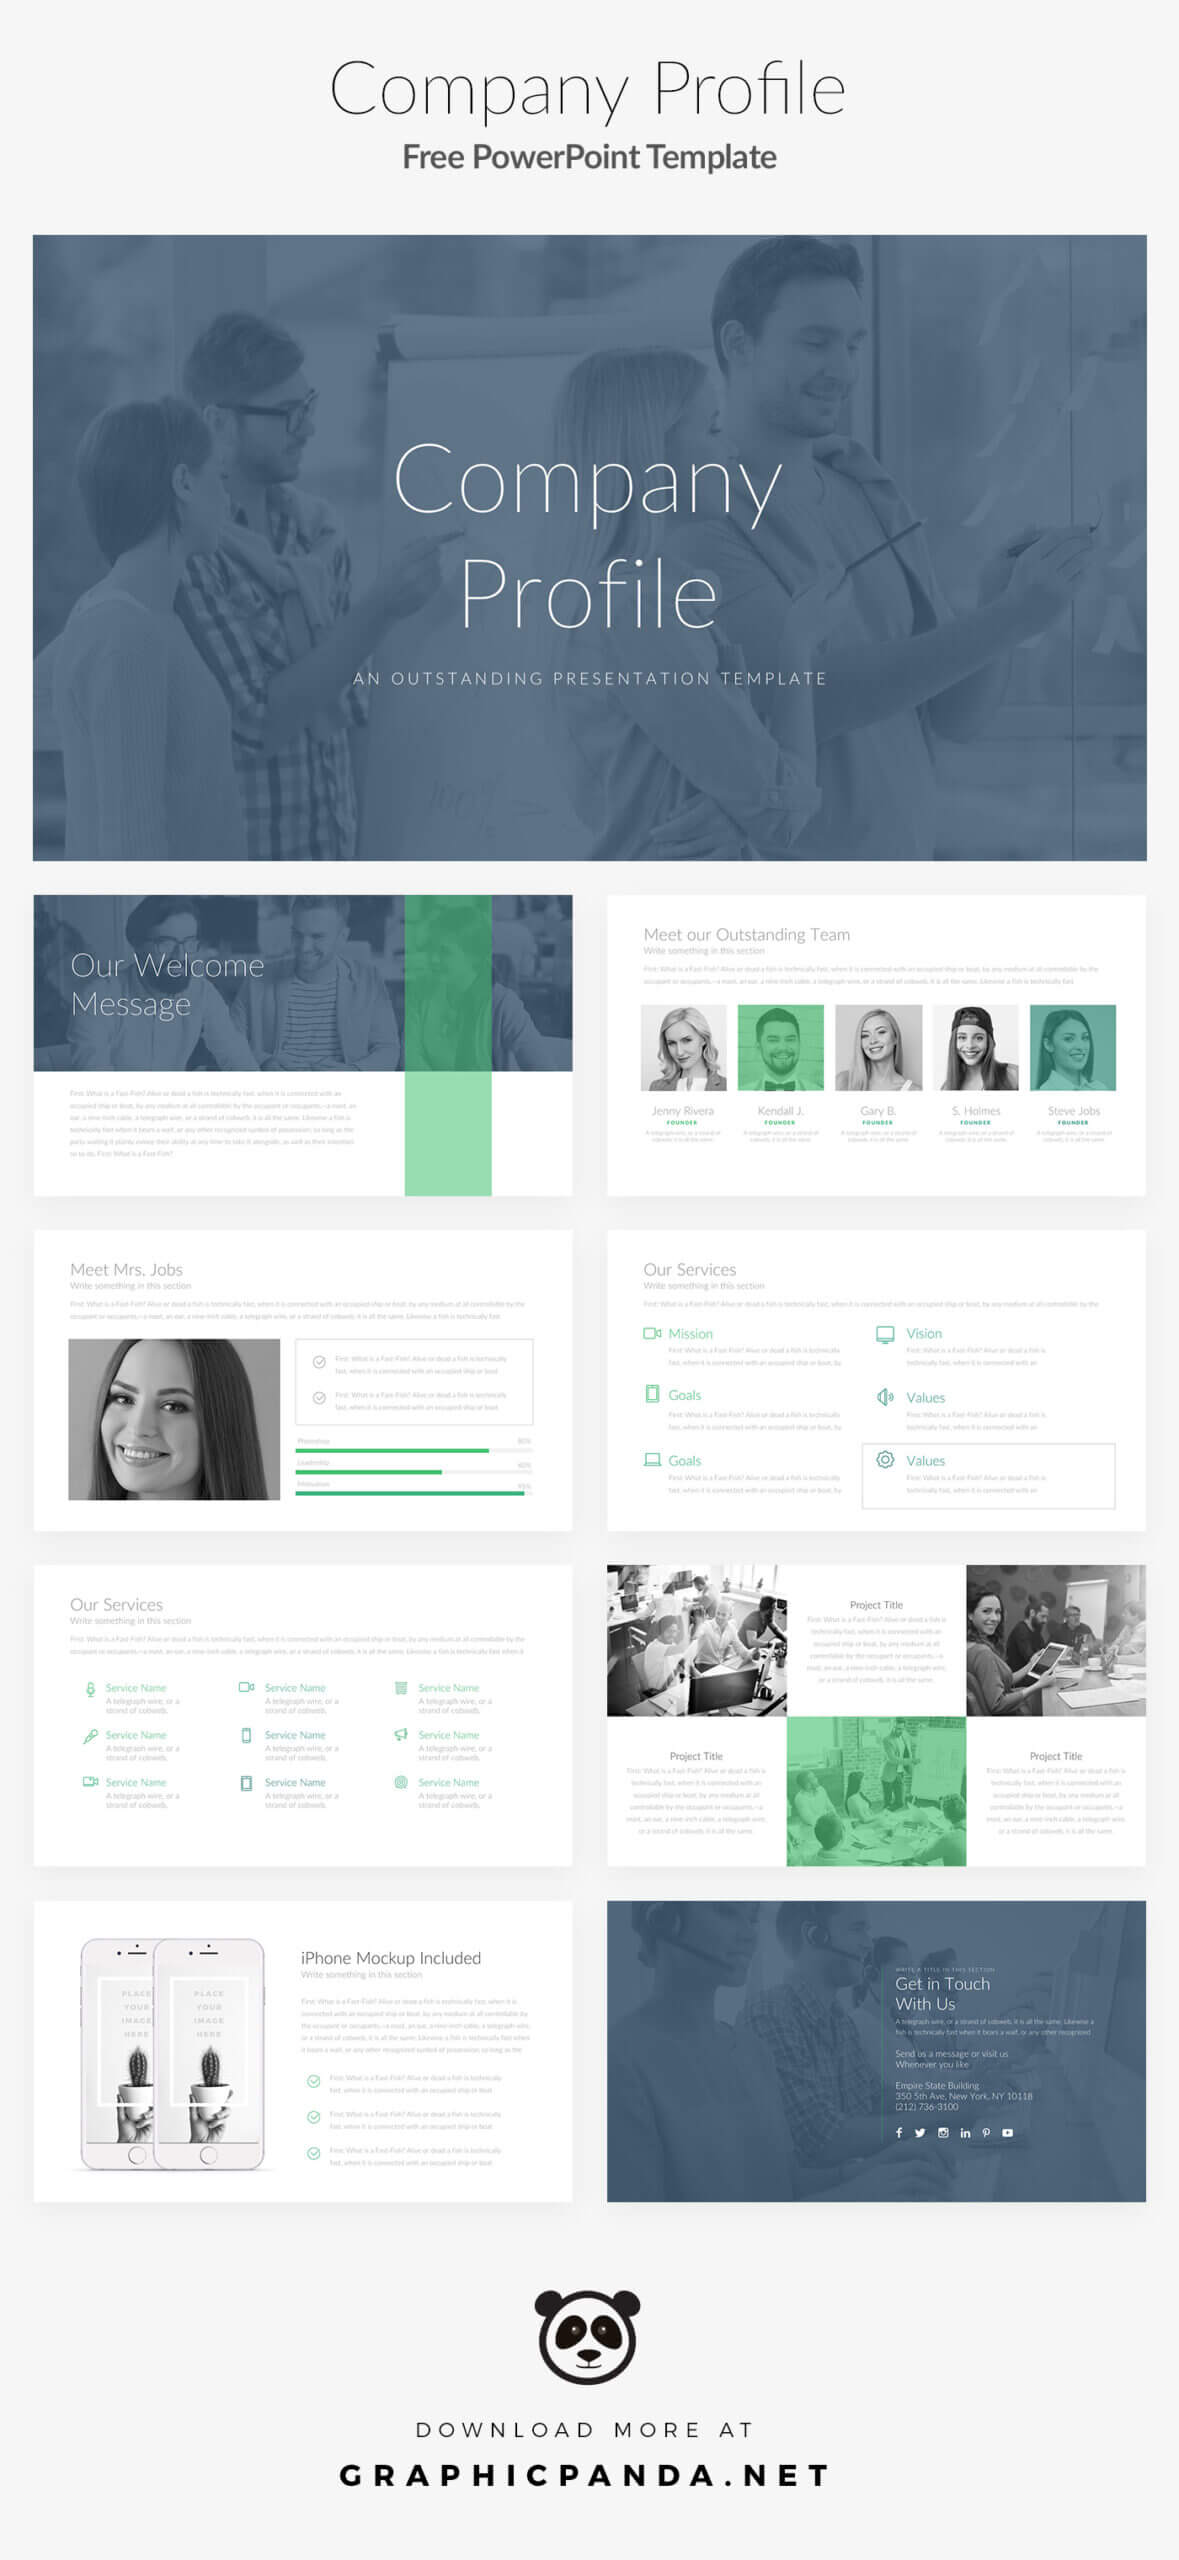 Free Download: Company Profile Powerpoint Template Inside Biography Powerpoint Template